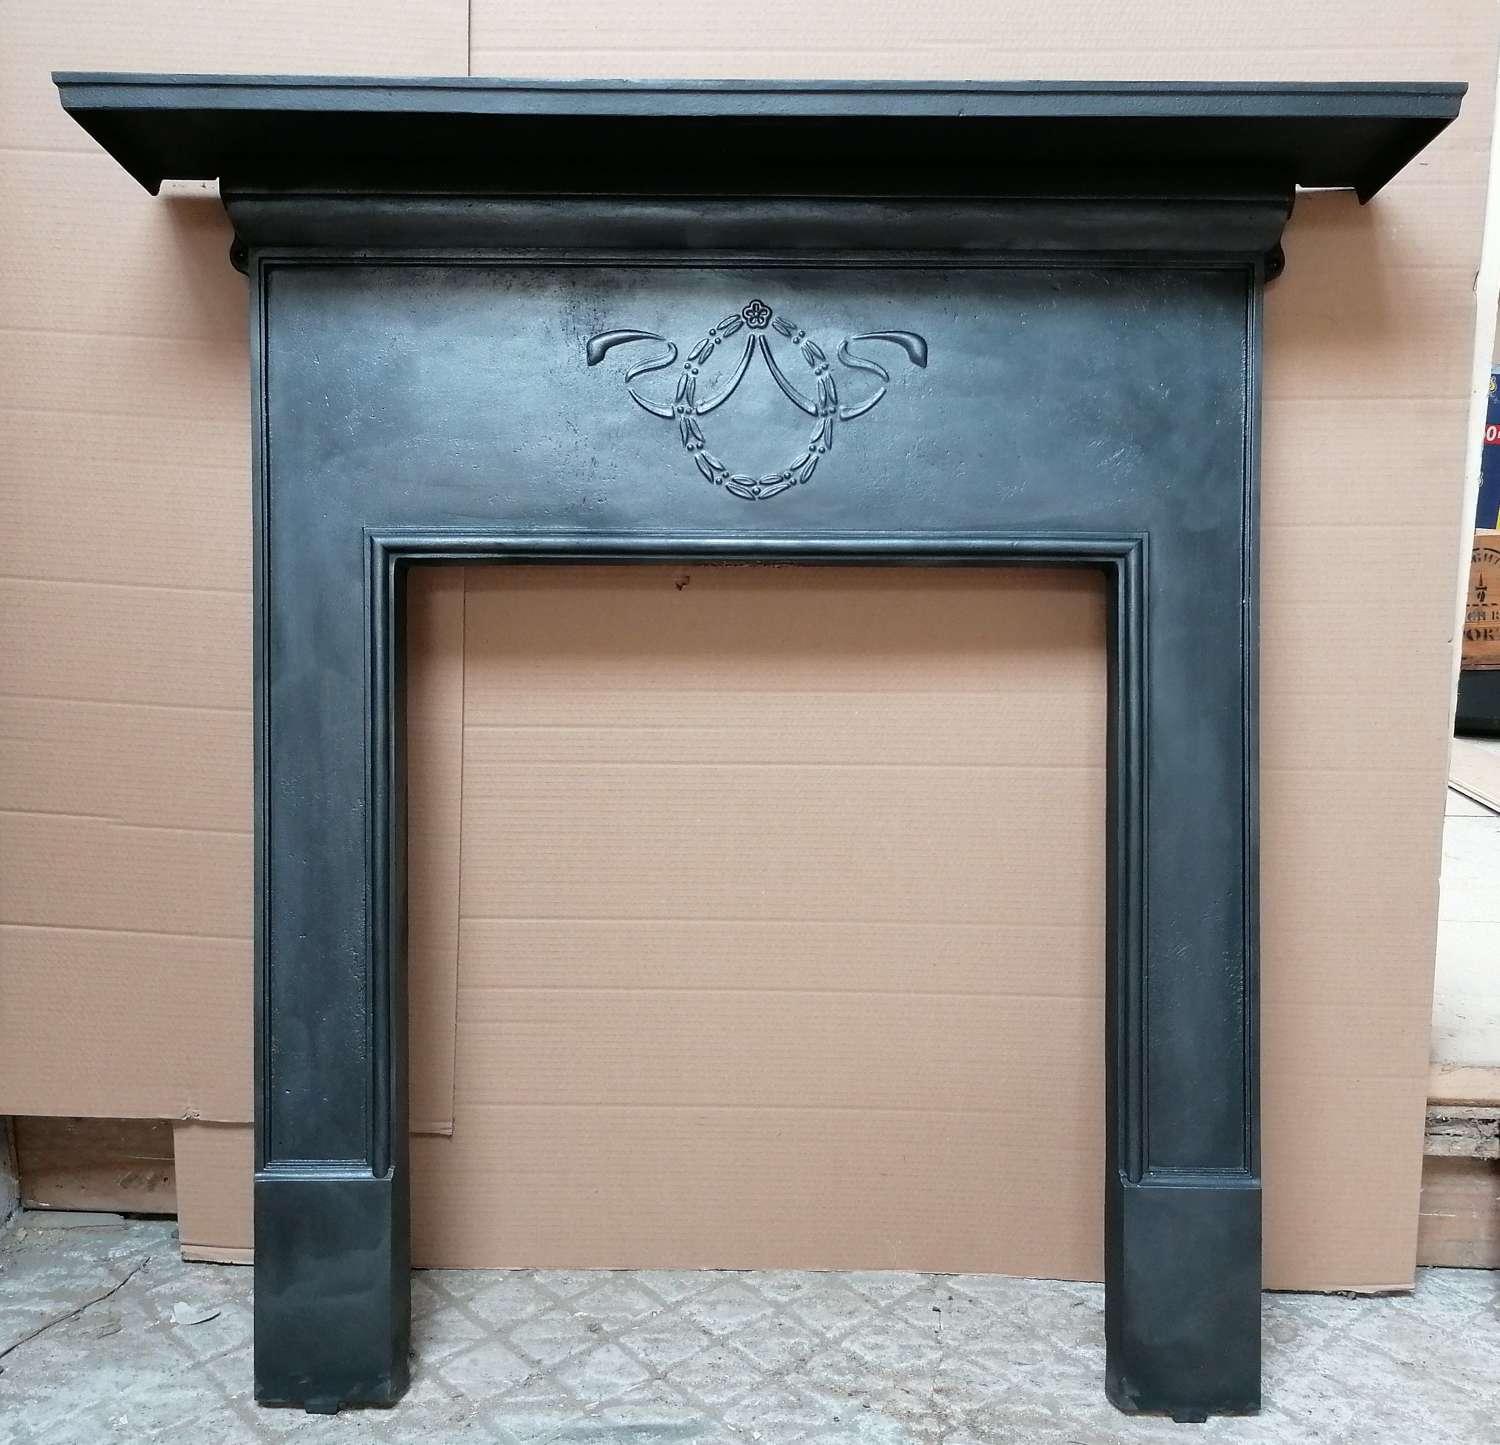 FS0119 A RECLAIMED EDWARDIAN CAST IRON FIRE SURROUND FOR WOODBURNER